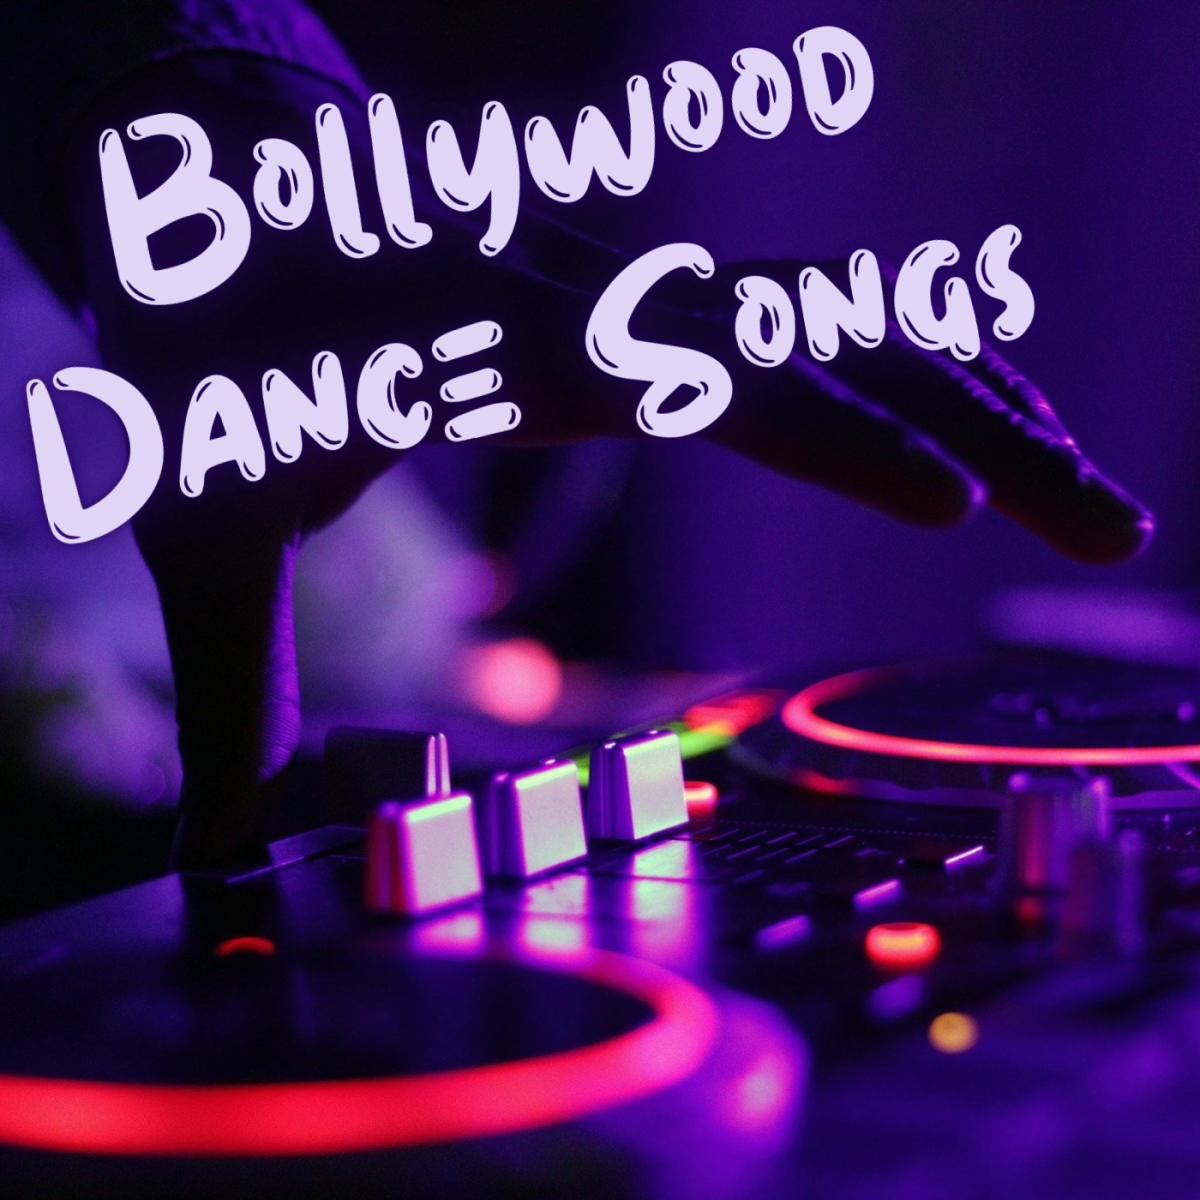 100 Best Bollywood Dance Songs For Parties